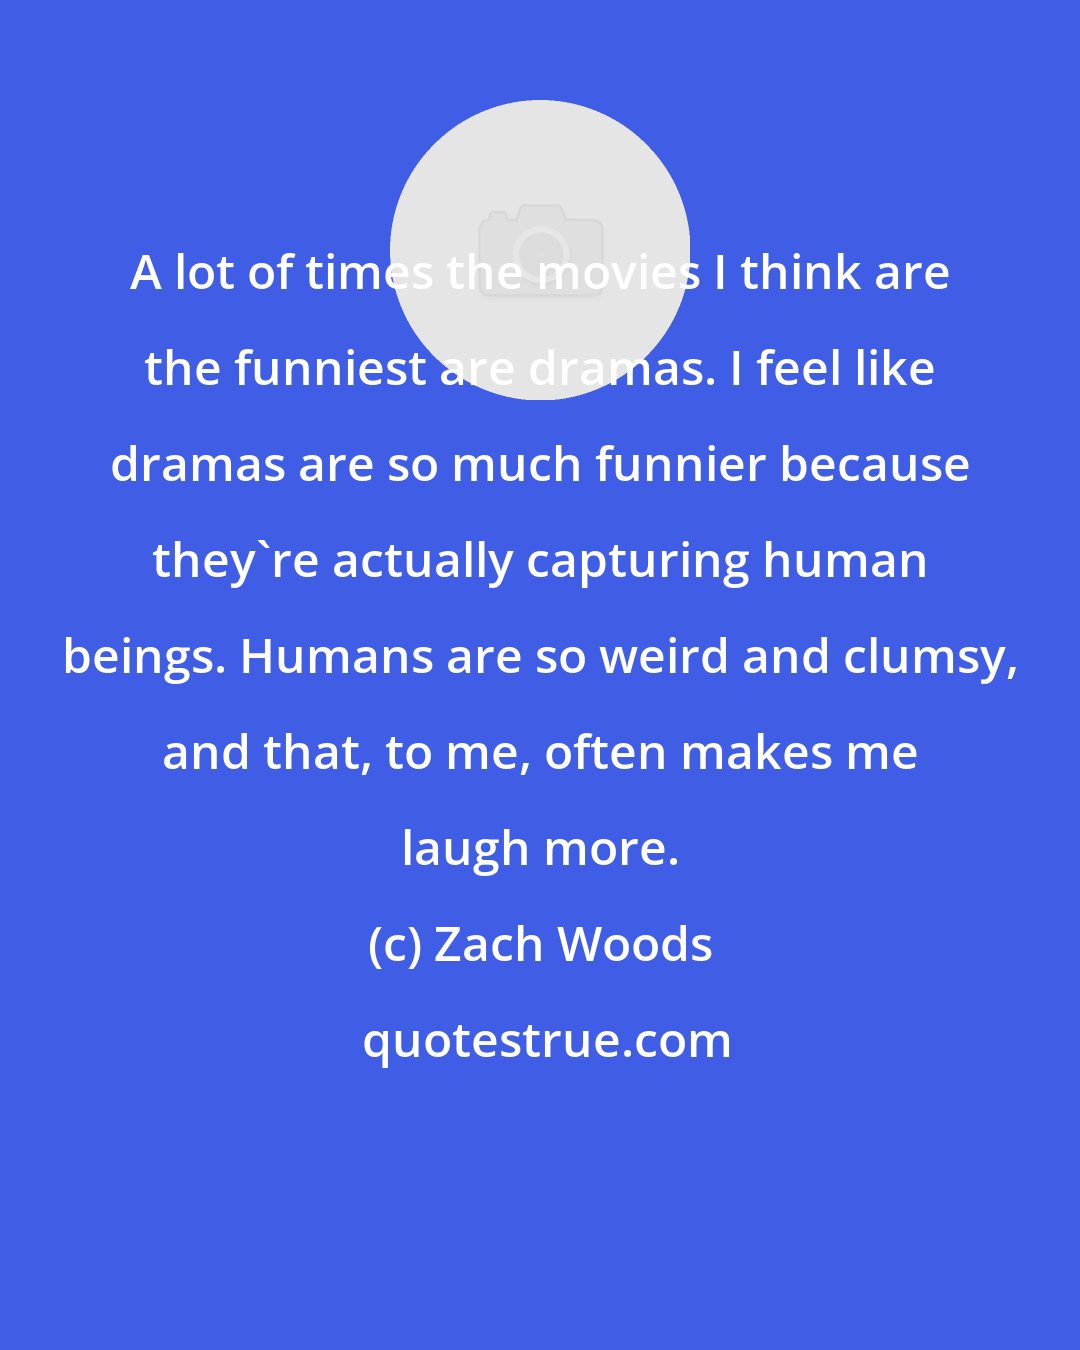 Zach Woods: A lot of times the movies I think are the funniest are dramas. I feel like dramas are so much funnier because they're actually capturing human beings. Humans are so weird and clumsy, and that, to me, often makes me laugh more.